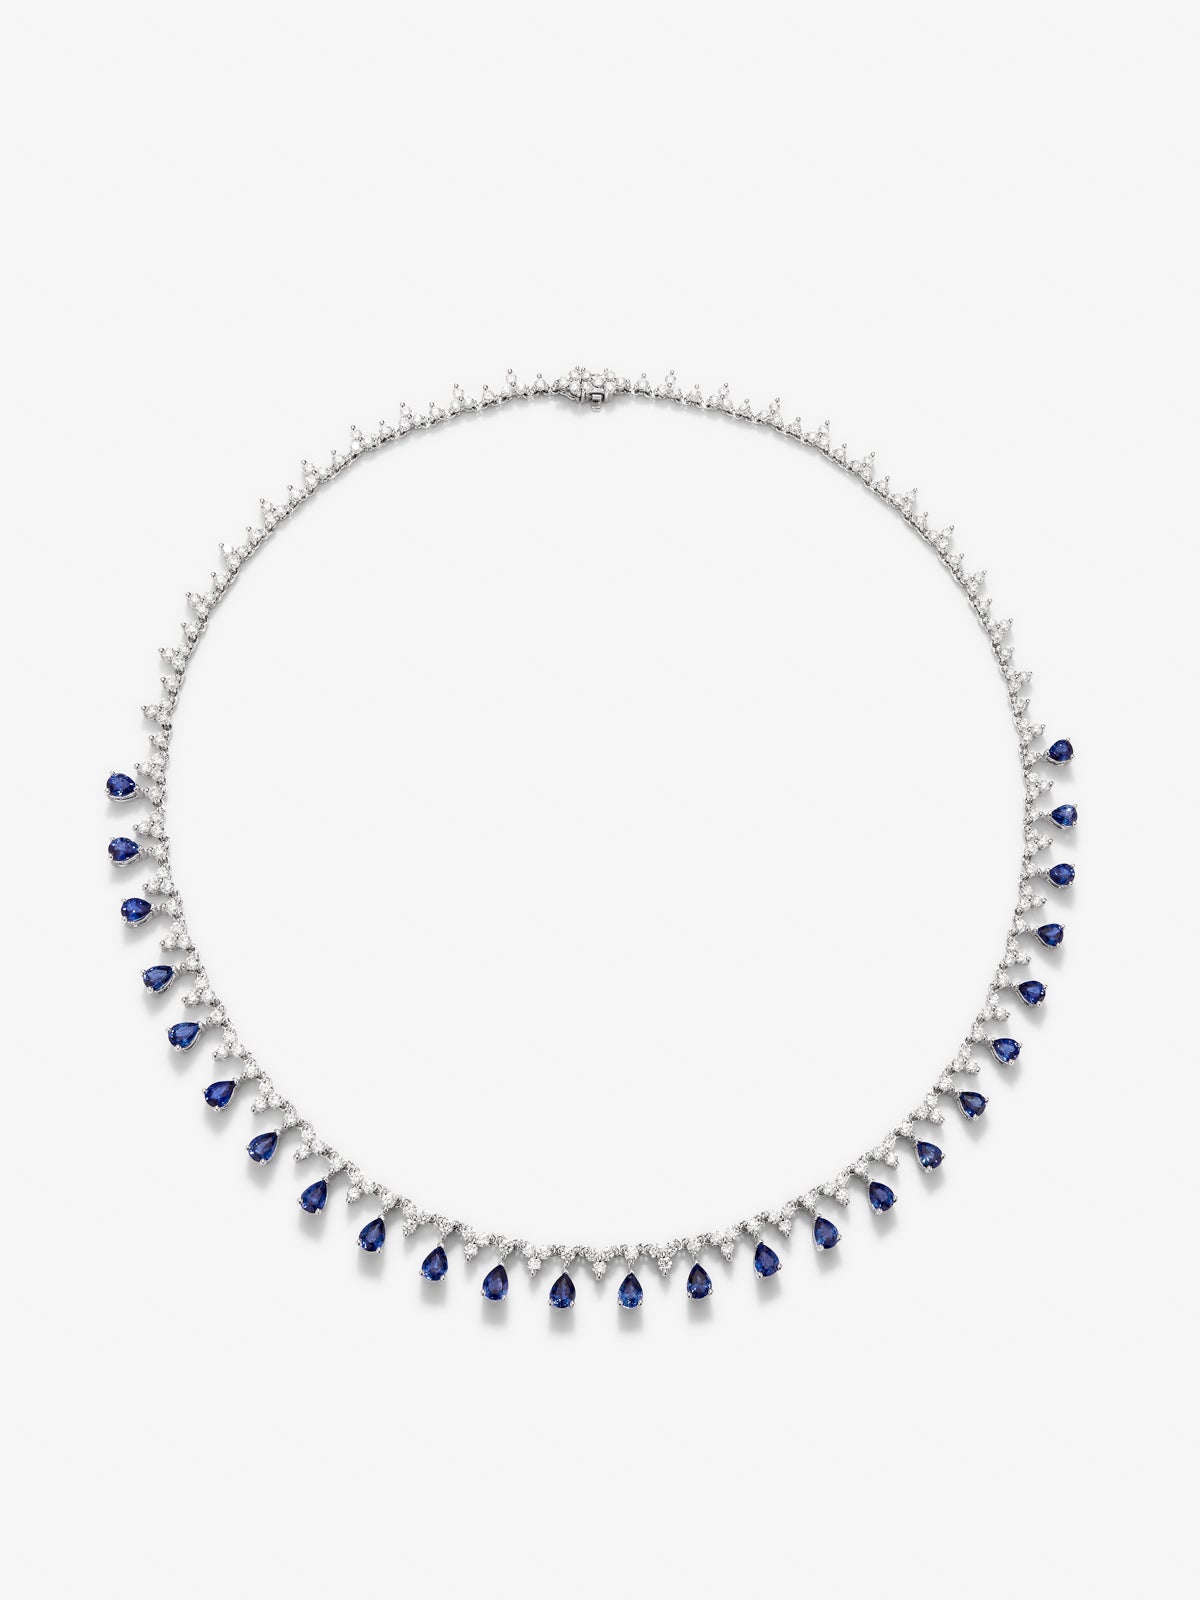 18K white gold rivière necklace with pear-cut blue sapphires of 6.51 cts and brilliant-cut diamonds of 6.16 cts